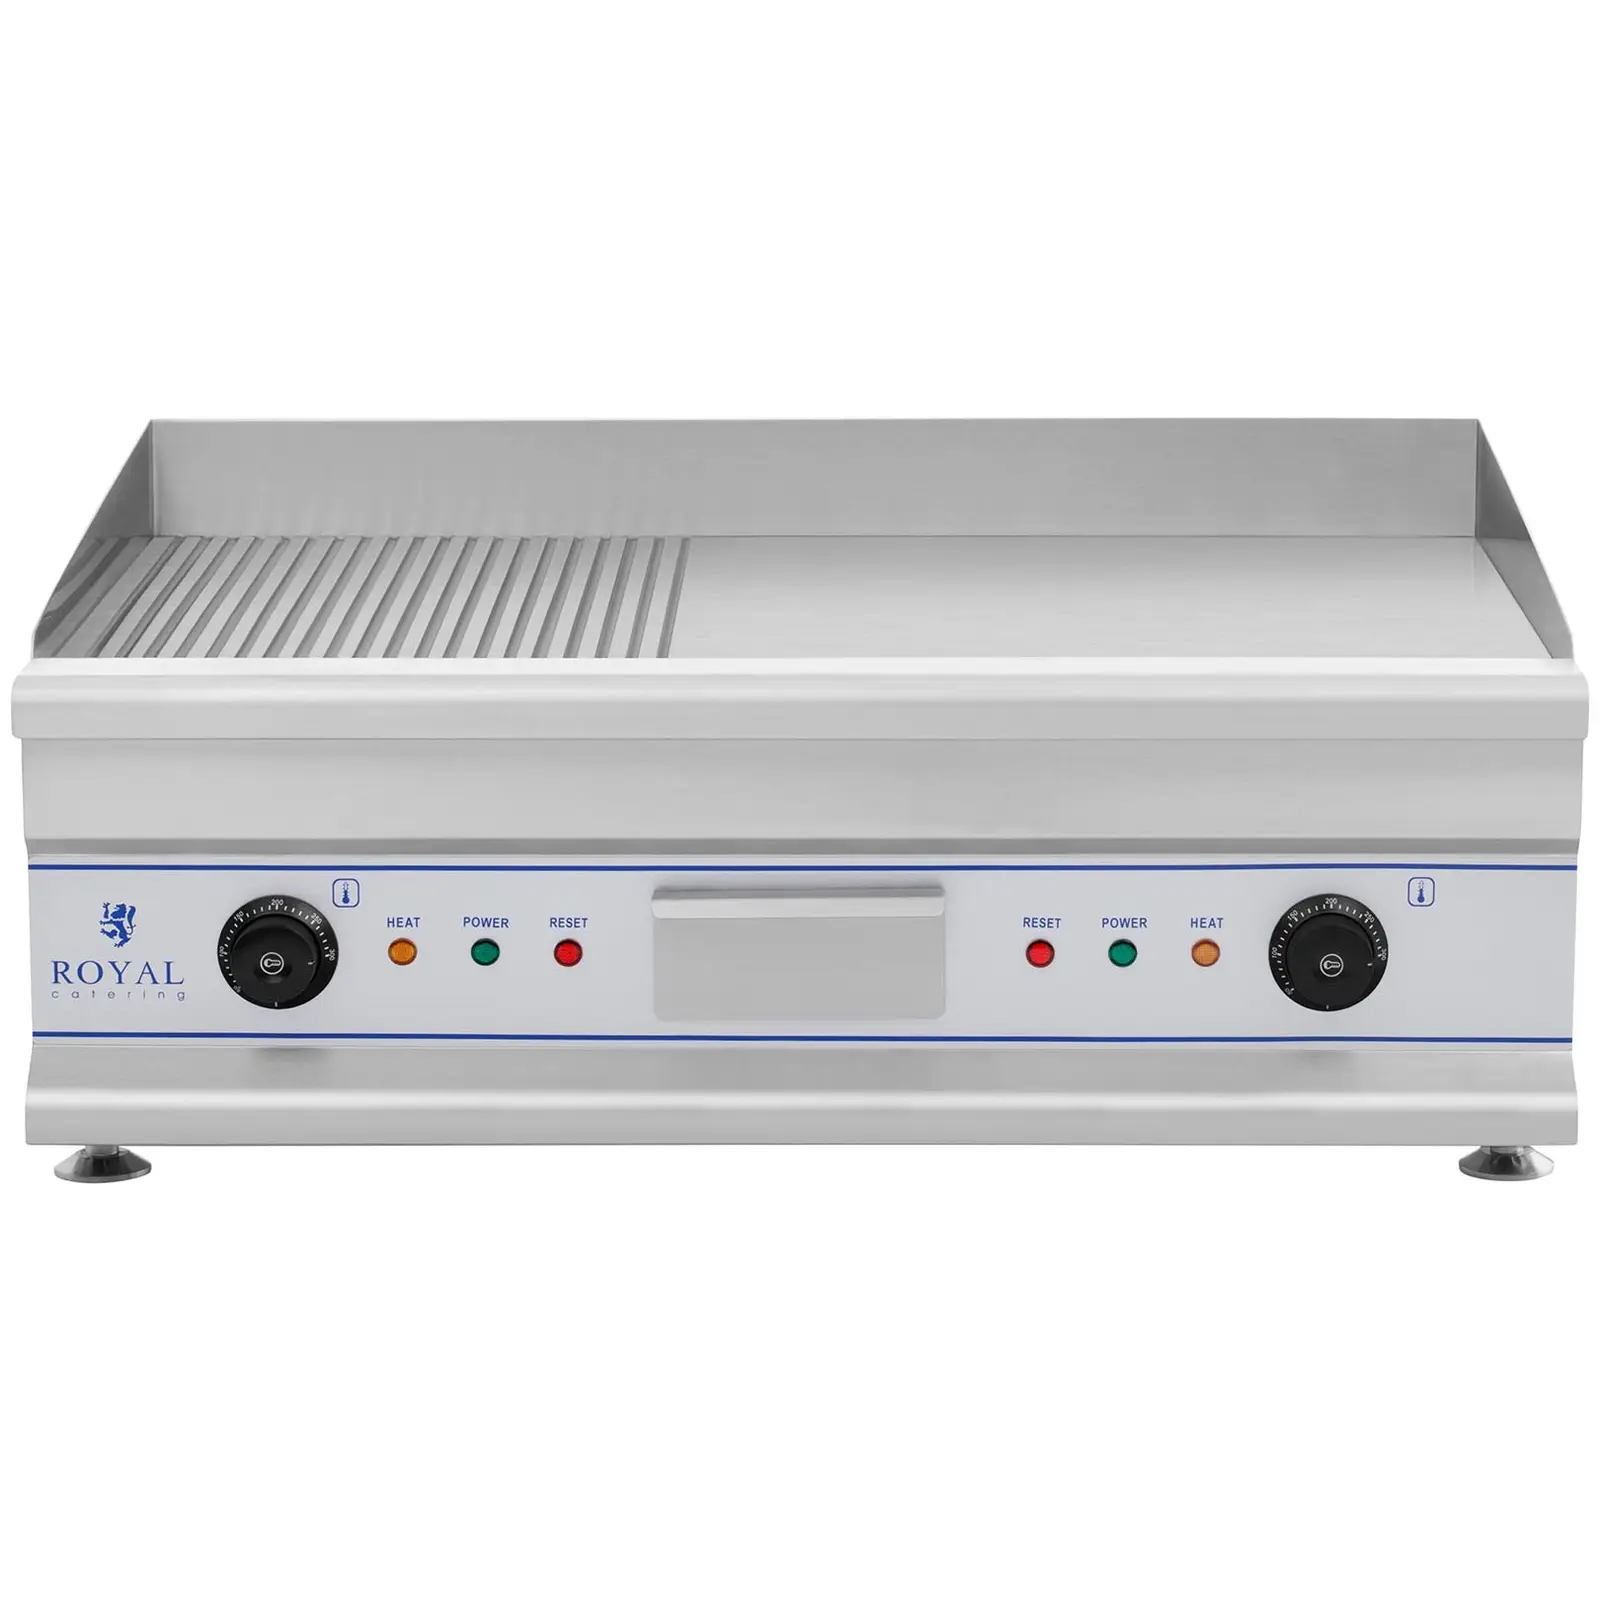 Electric Griddle - 75 cm - ribbed/smooth - 2 x 3200 W